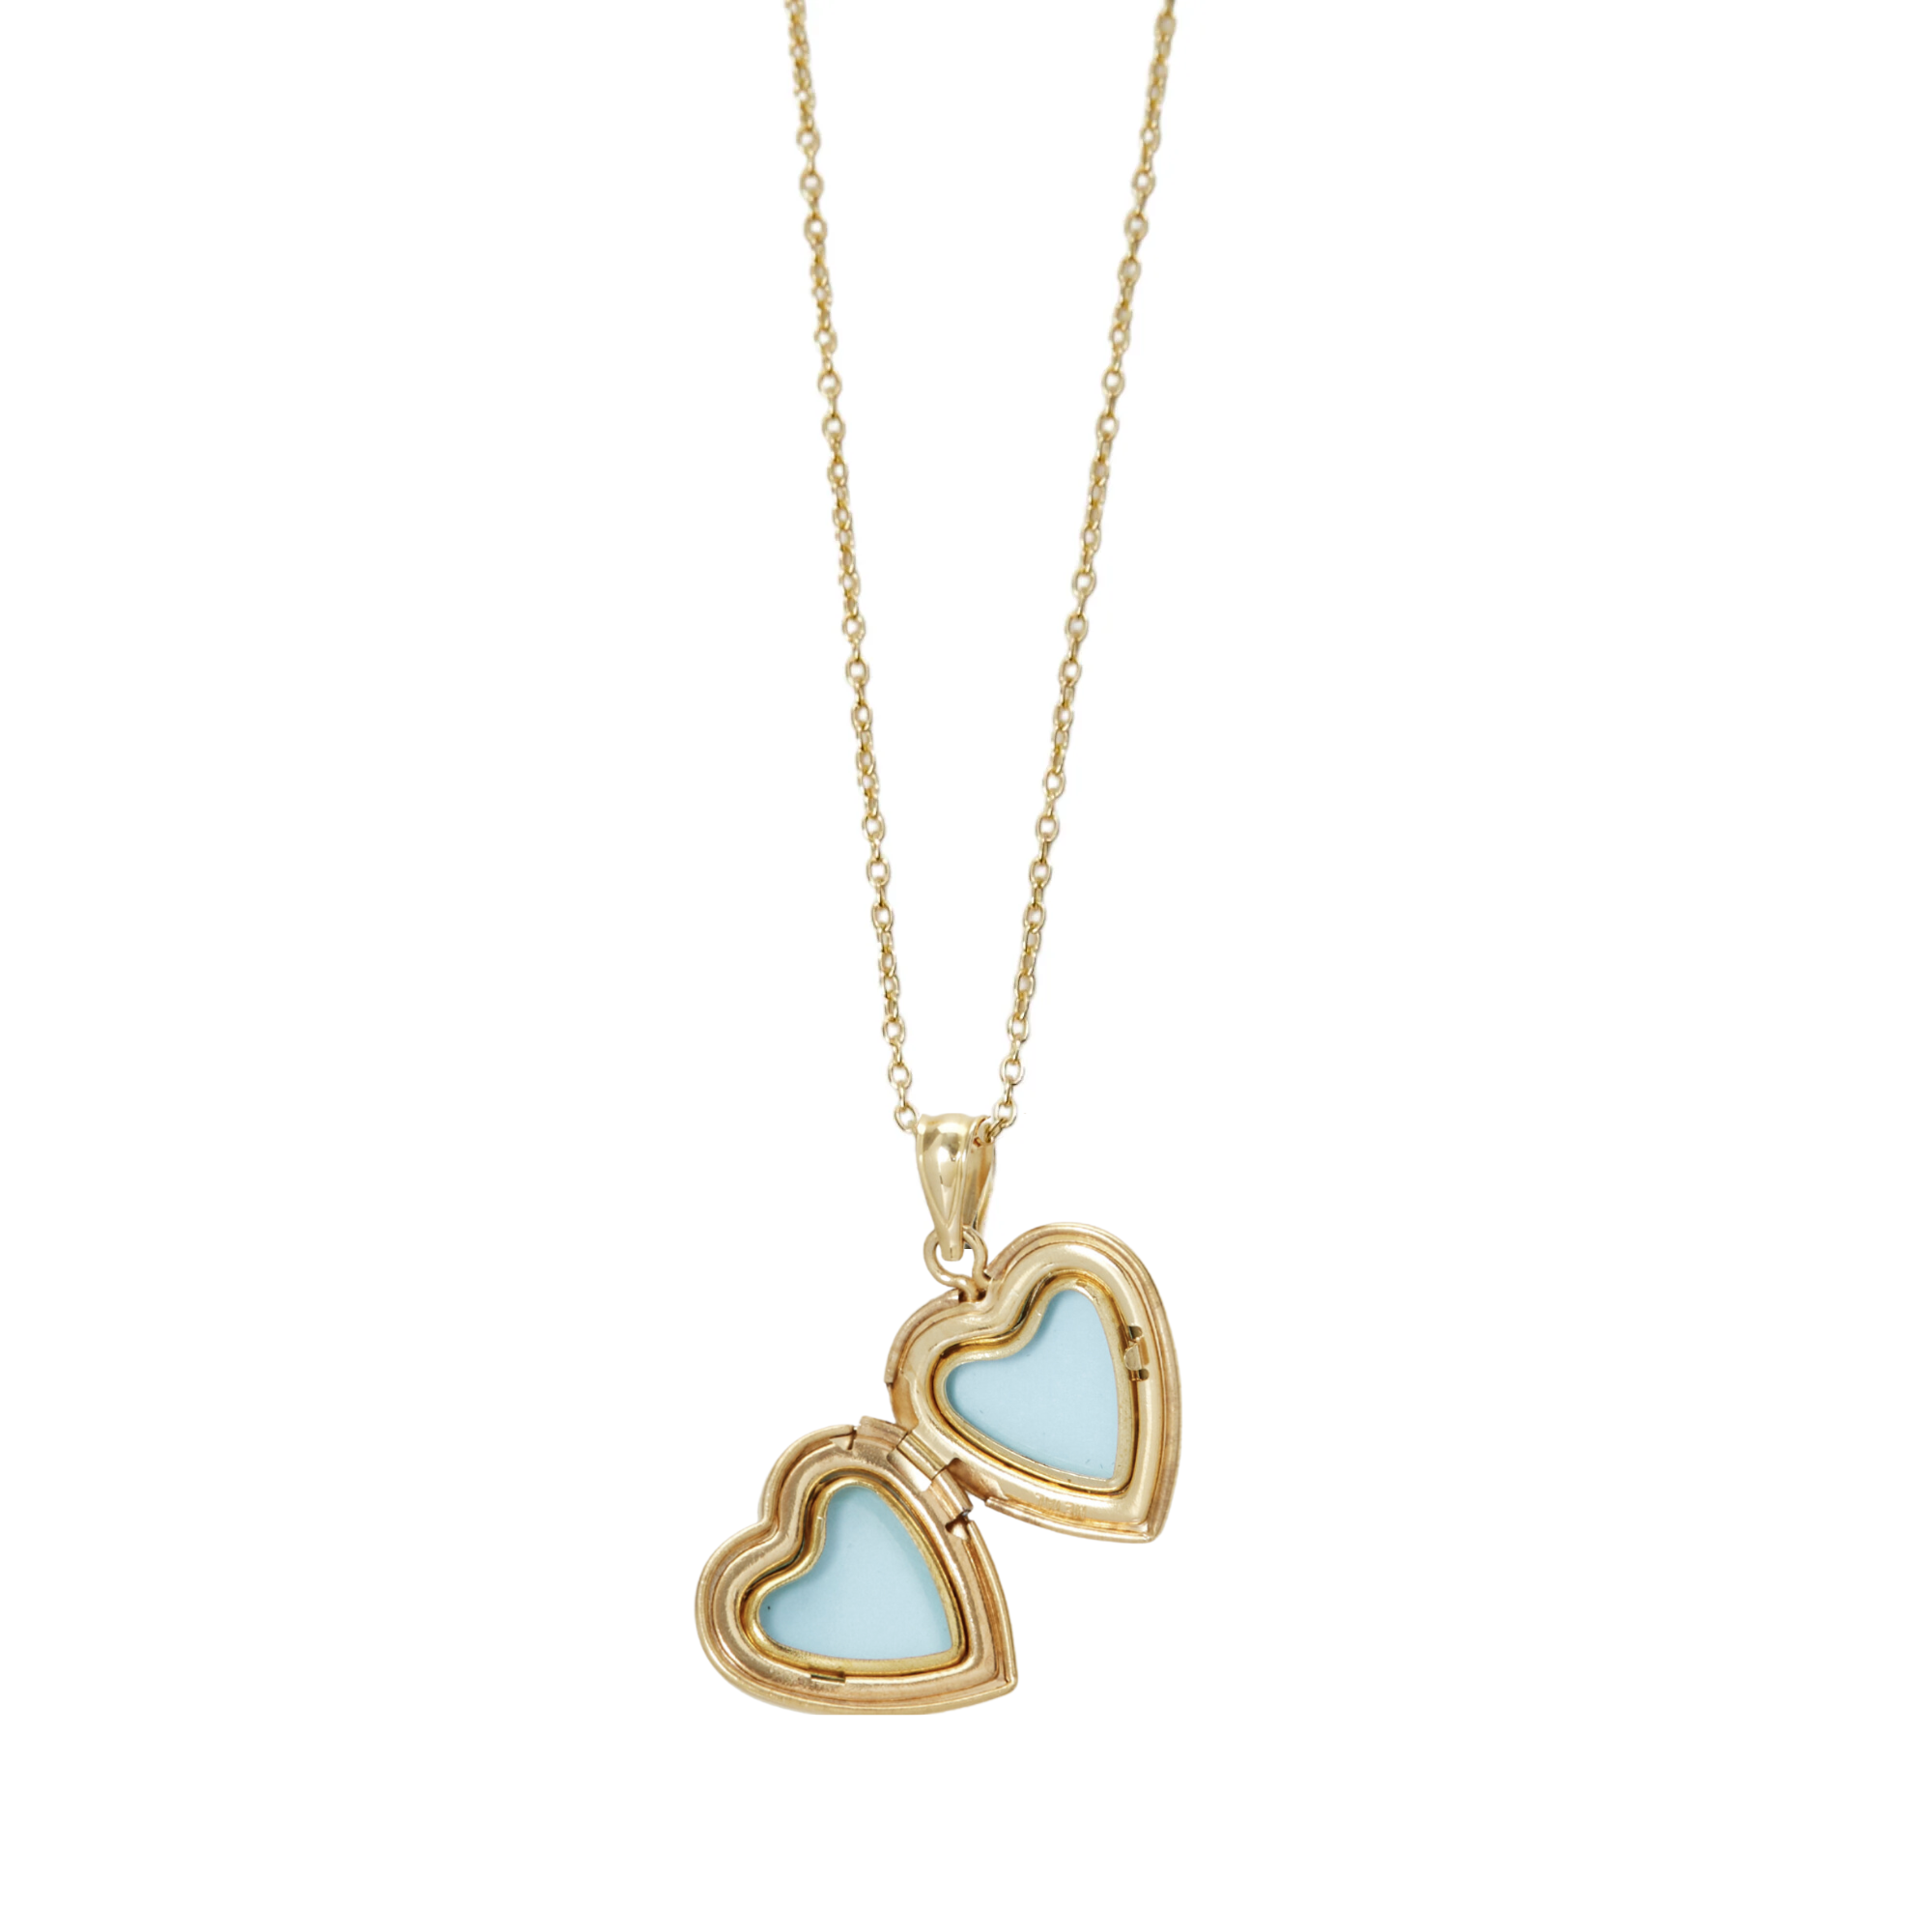 THE HEART LOCKET NECKLACE